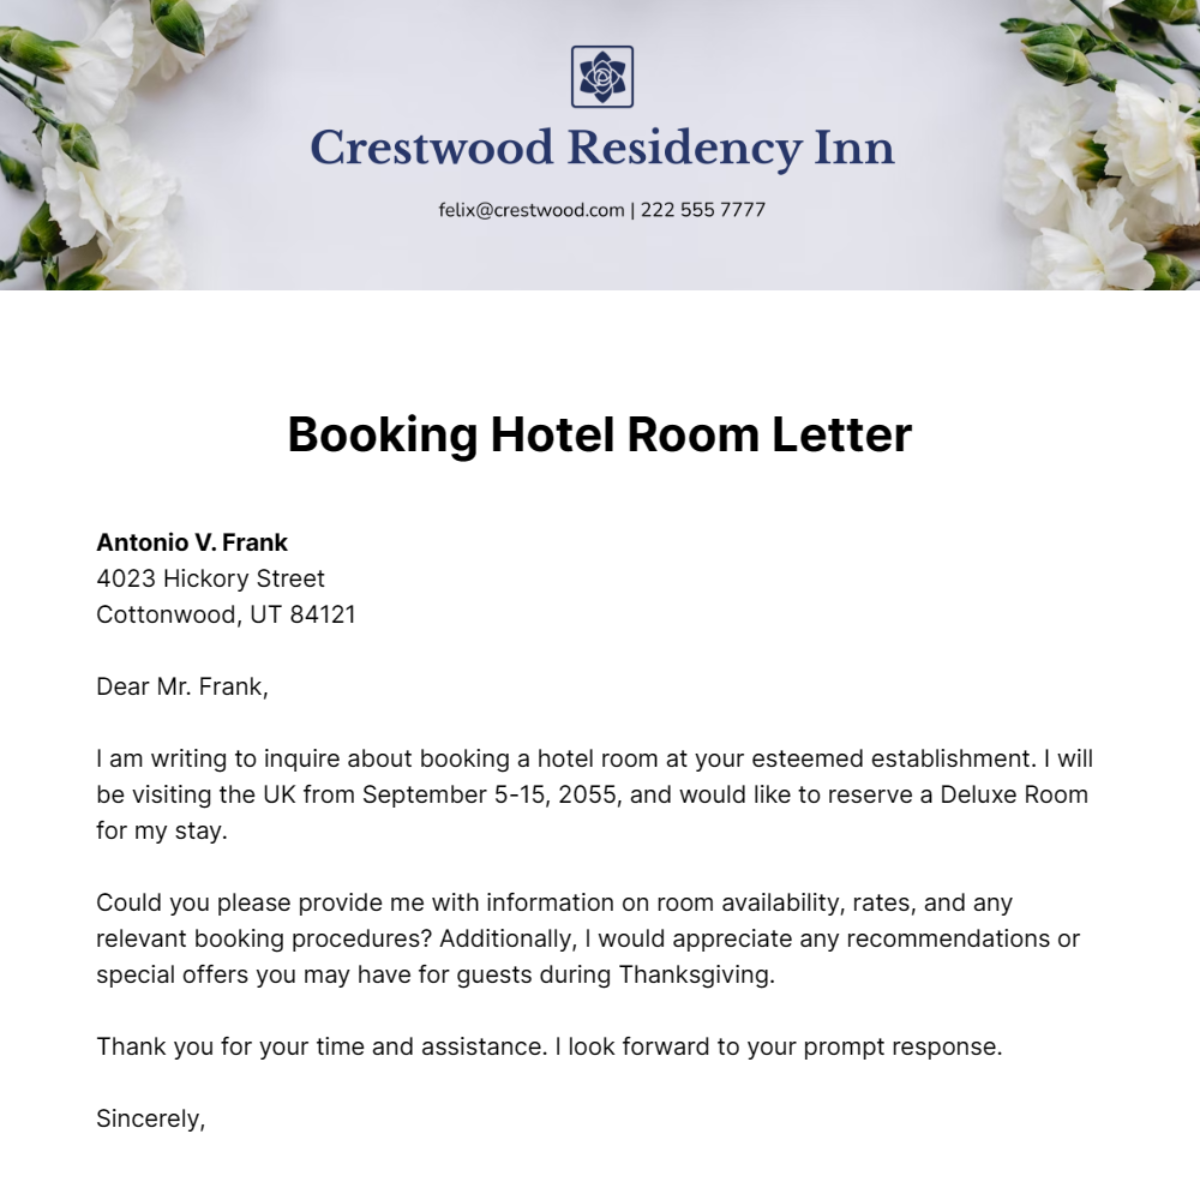 Booking Hotel Room Letter Template